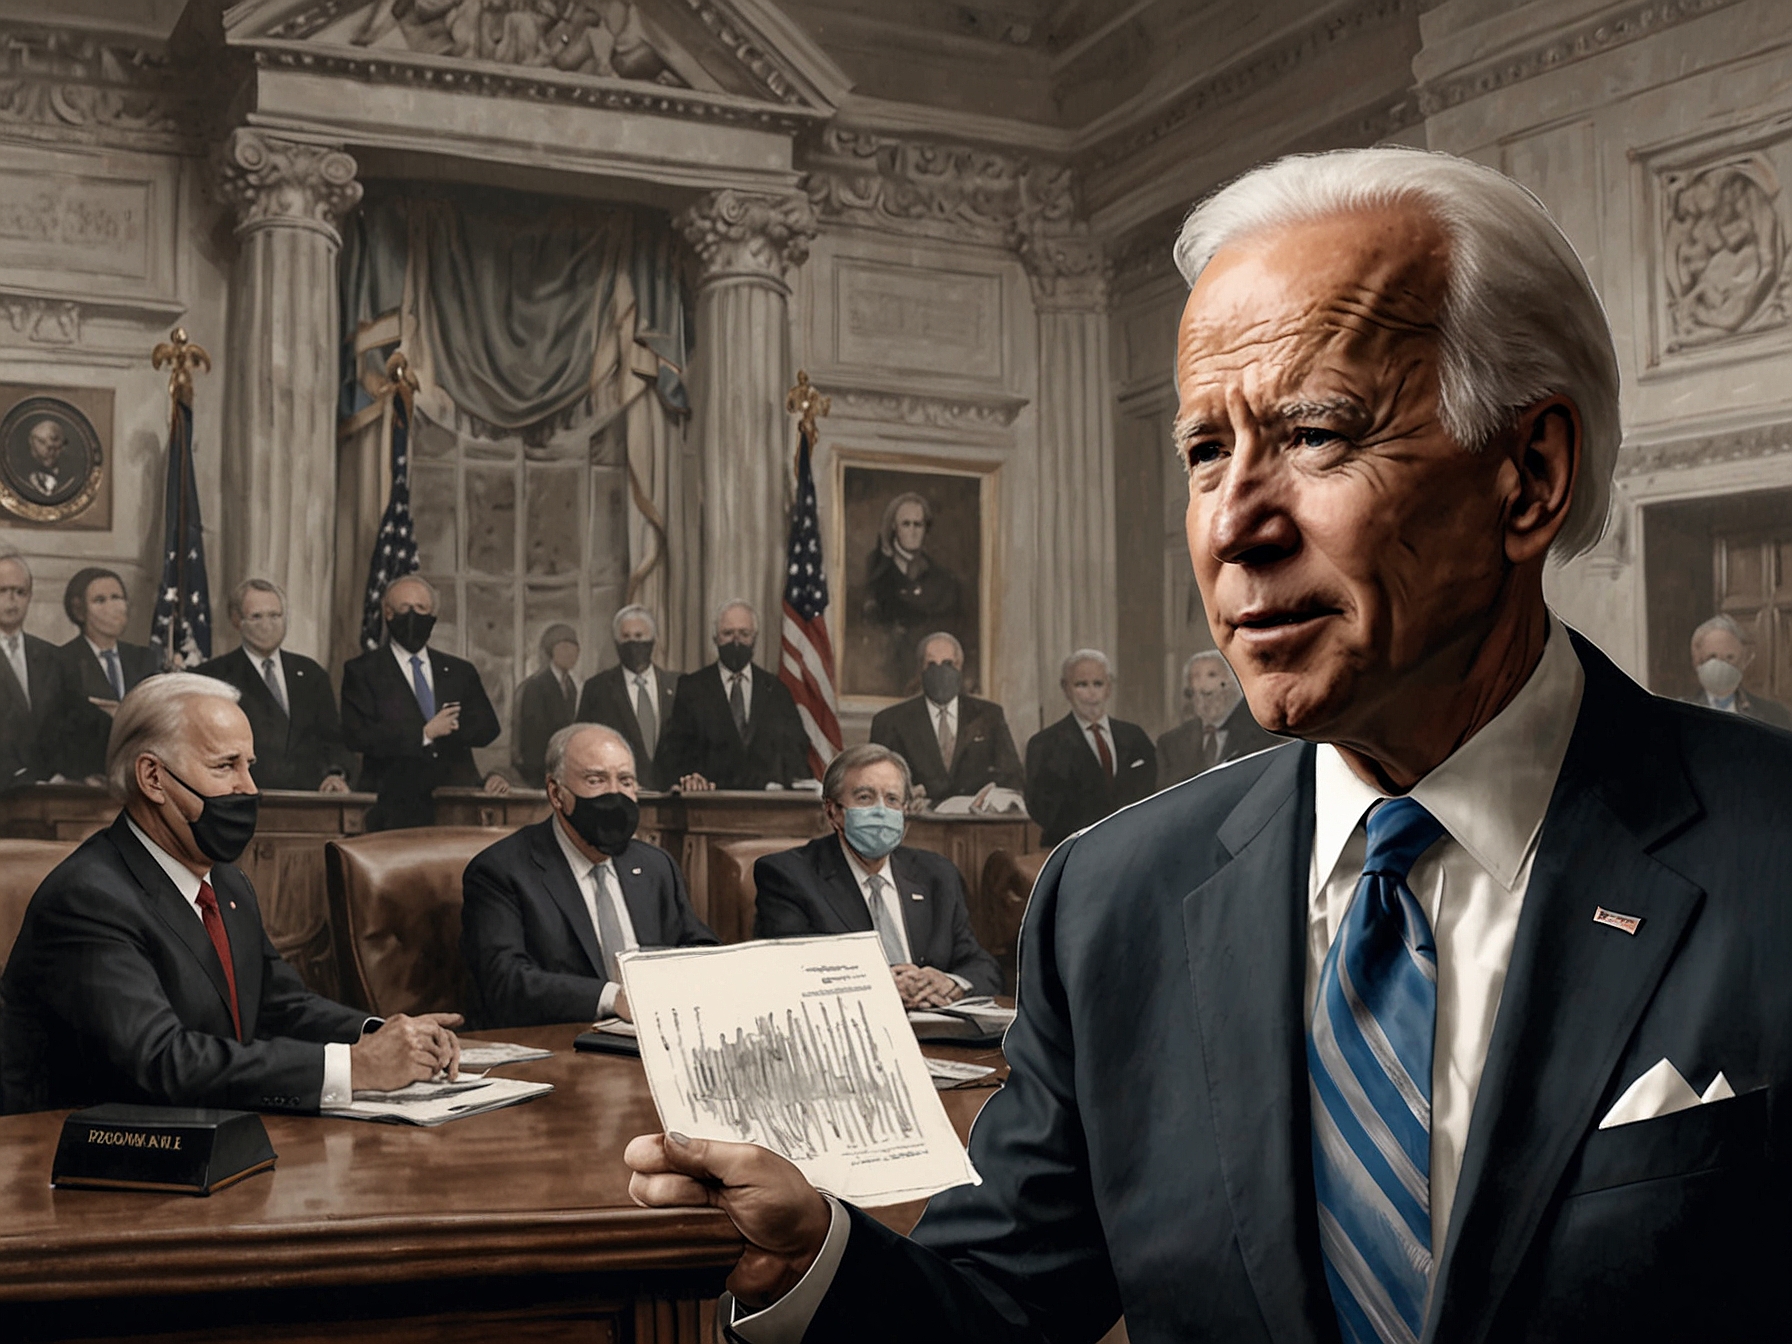 Visual of Biden emphasizing his administration's achievements, showcasing a backdrop of key moments like COVID-19 response, economic recovery, and international relations to underline his debate points.